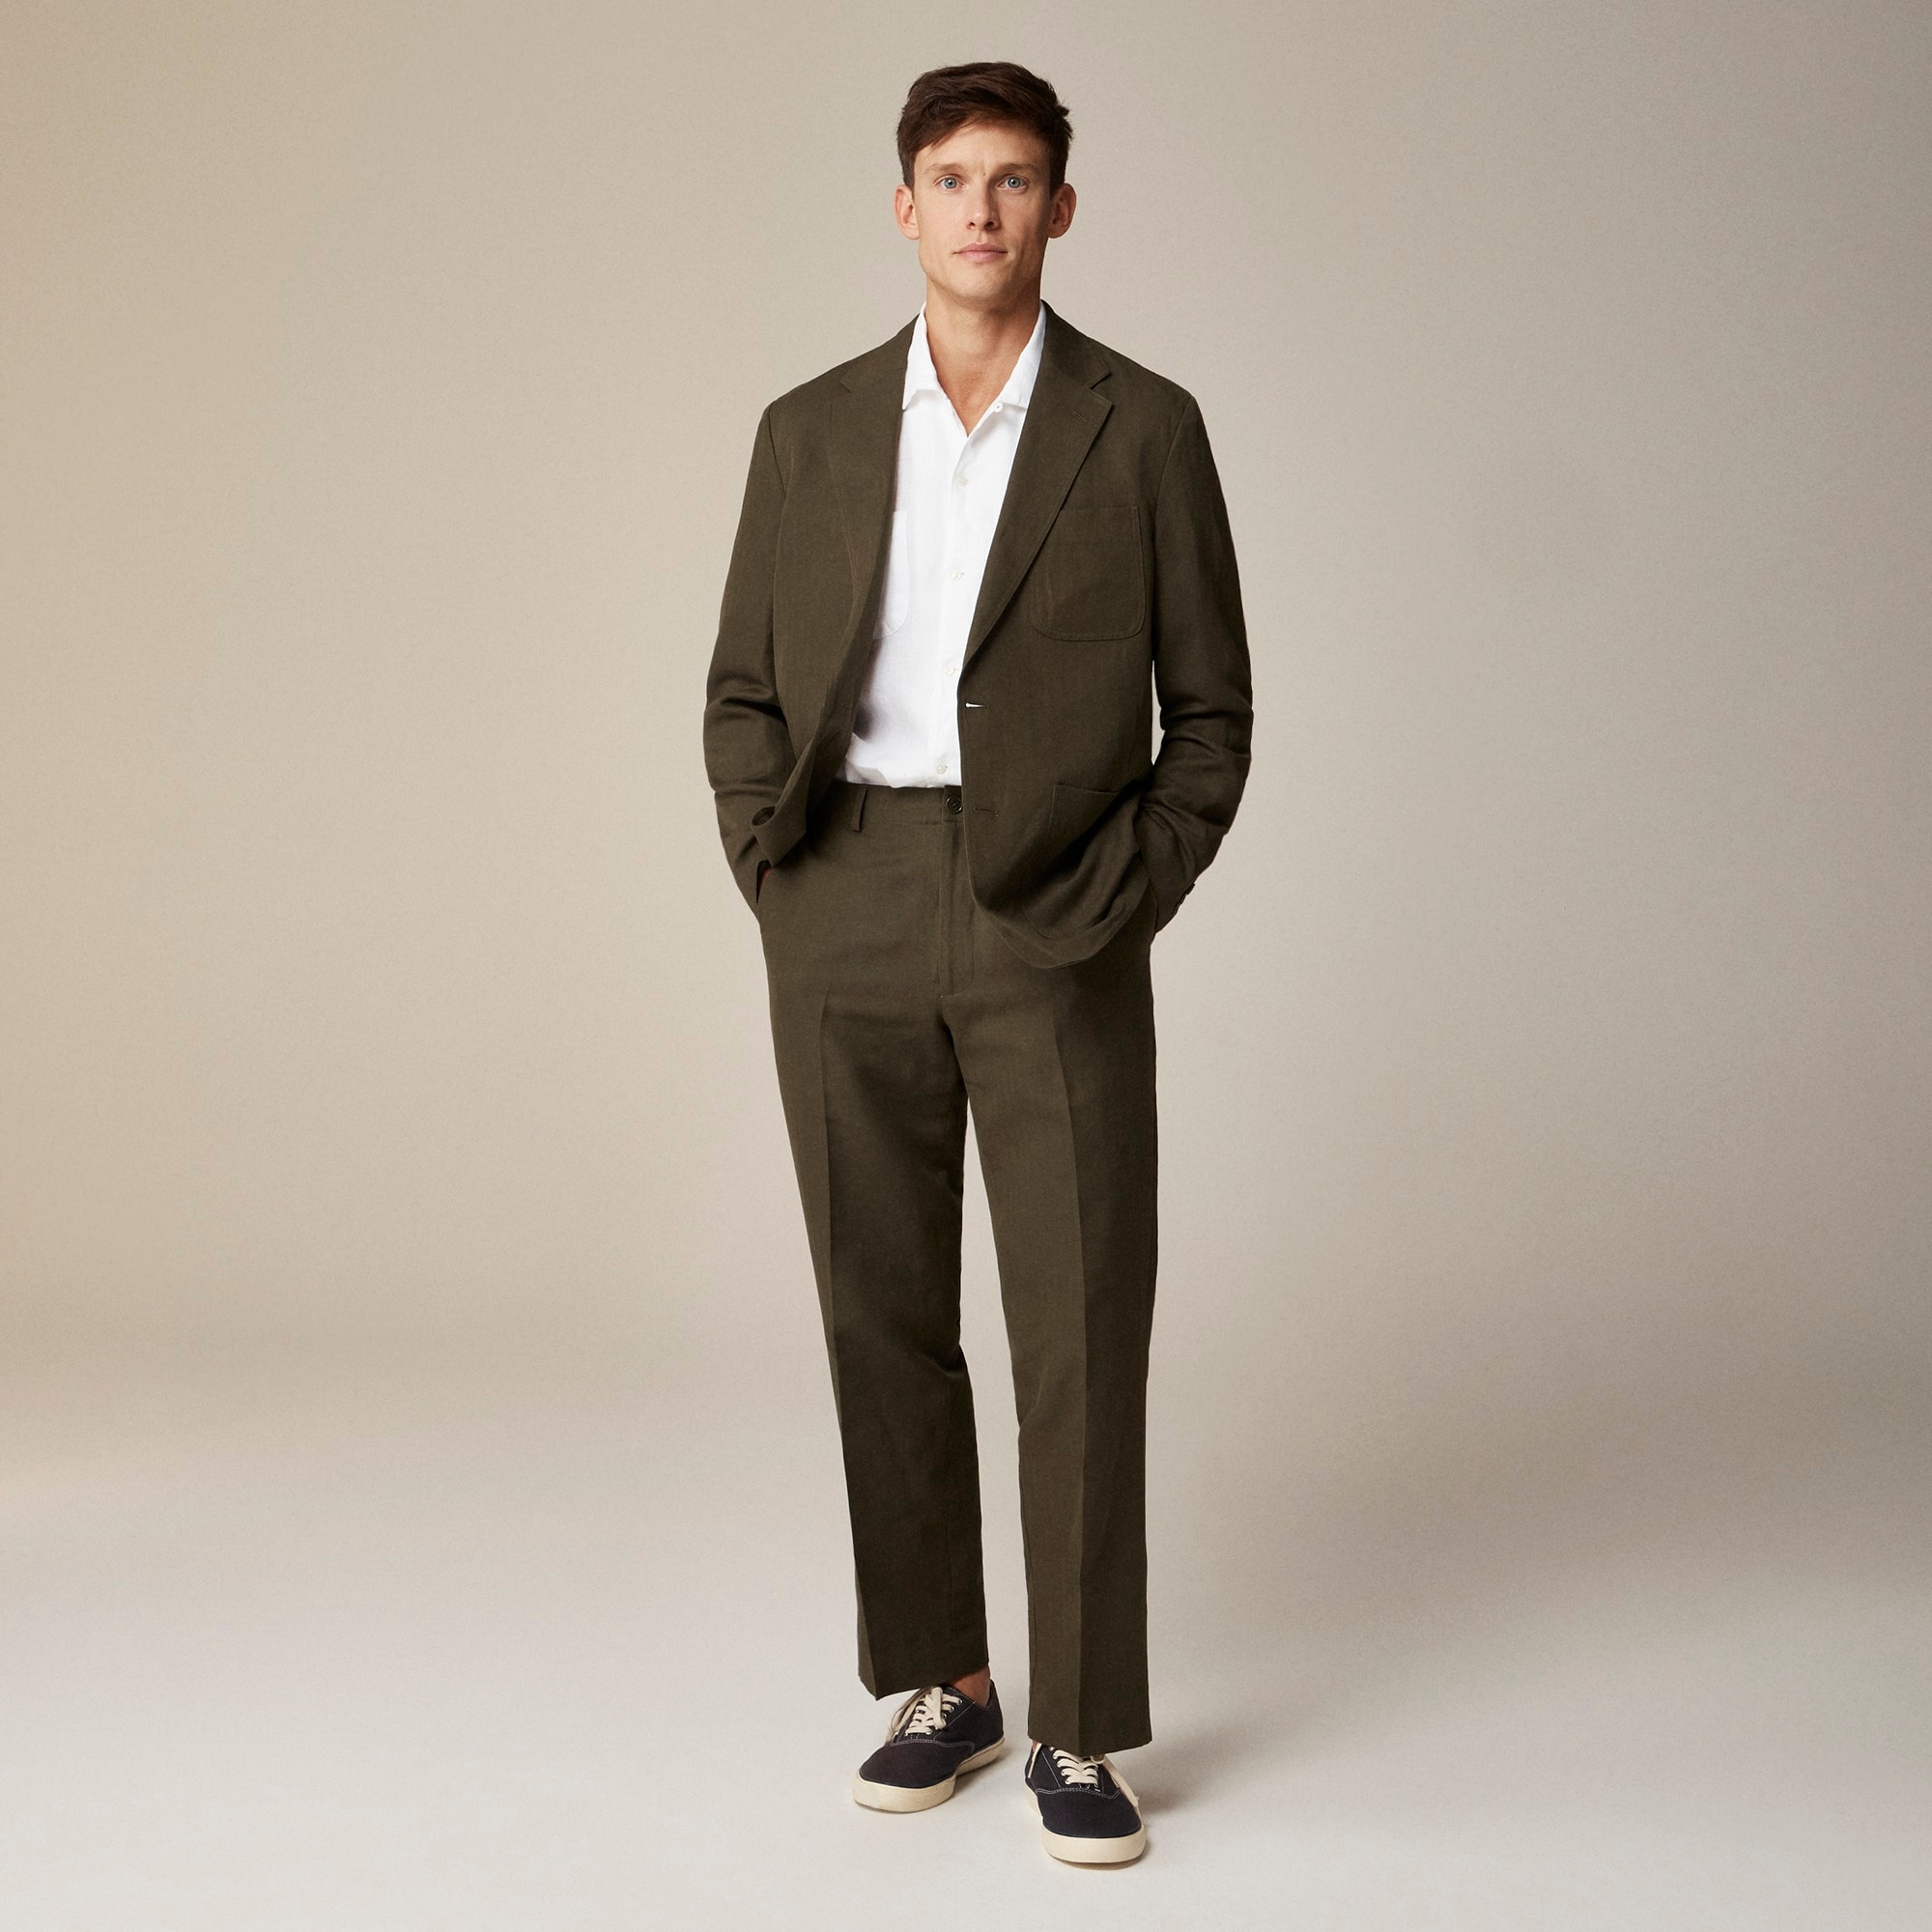 j.crew: kenmare relaxed-fit unstructured suit jacket in cotton-linen blend herringbone for men